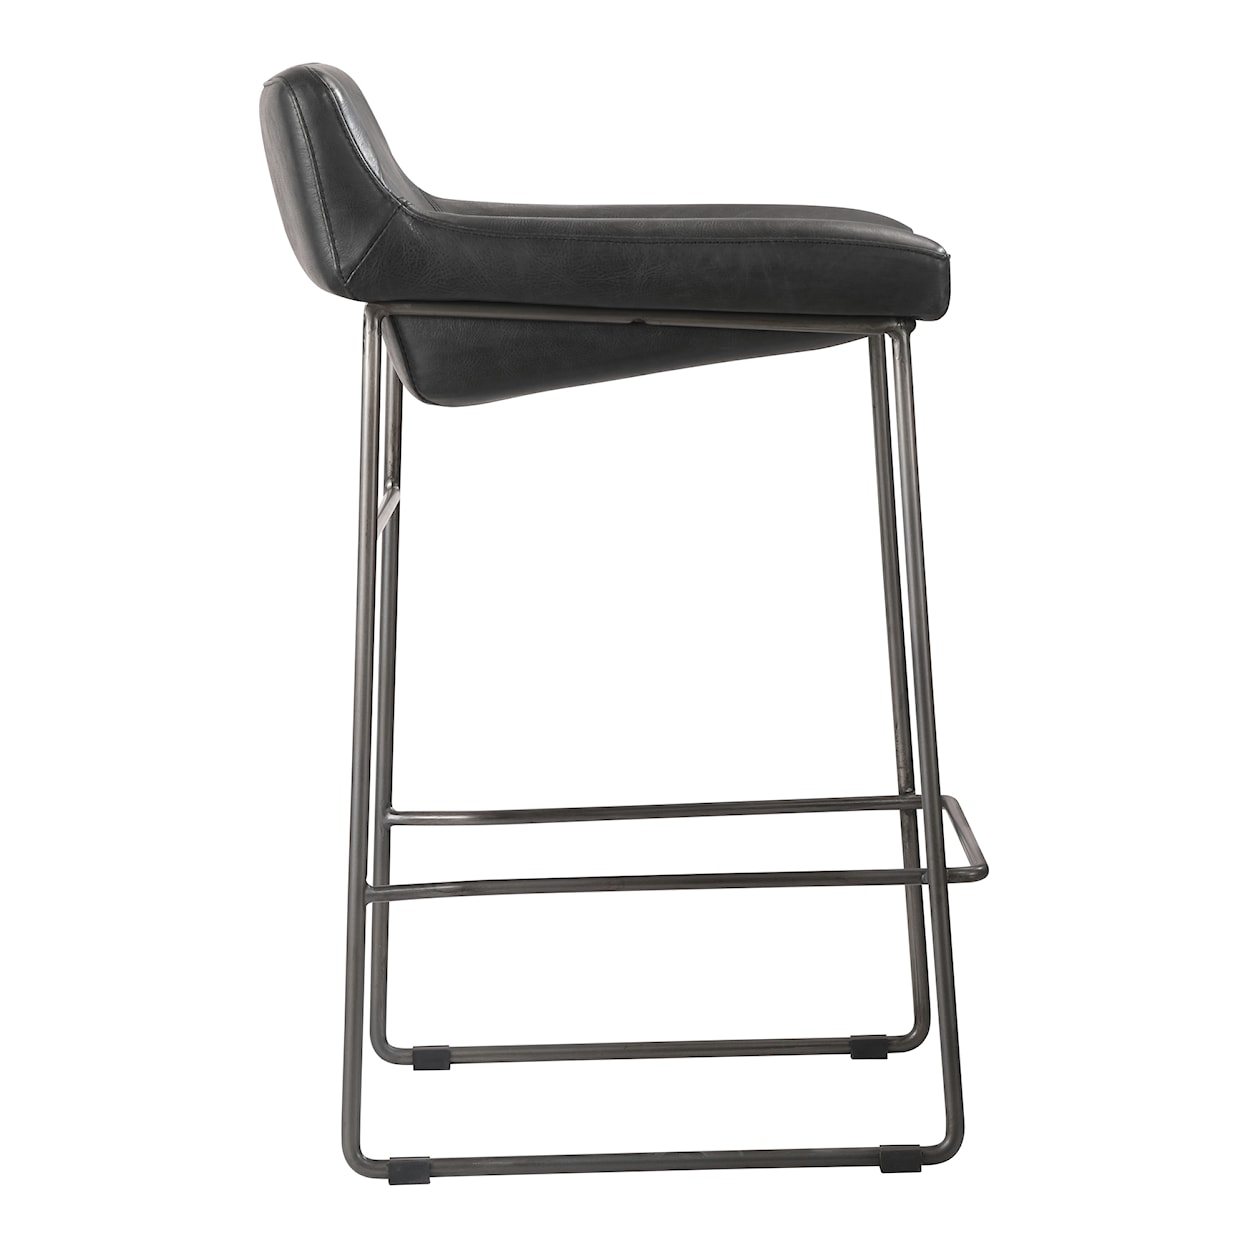 Moe's Home Collection Starlet Starlet Counter Stool Onyx Black Leather -M2